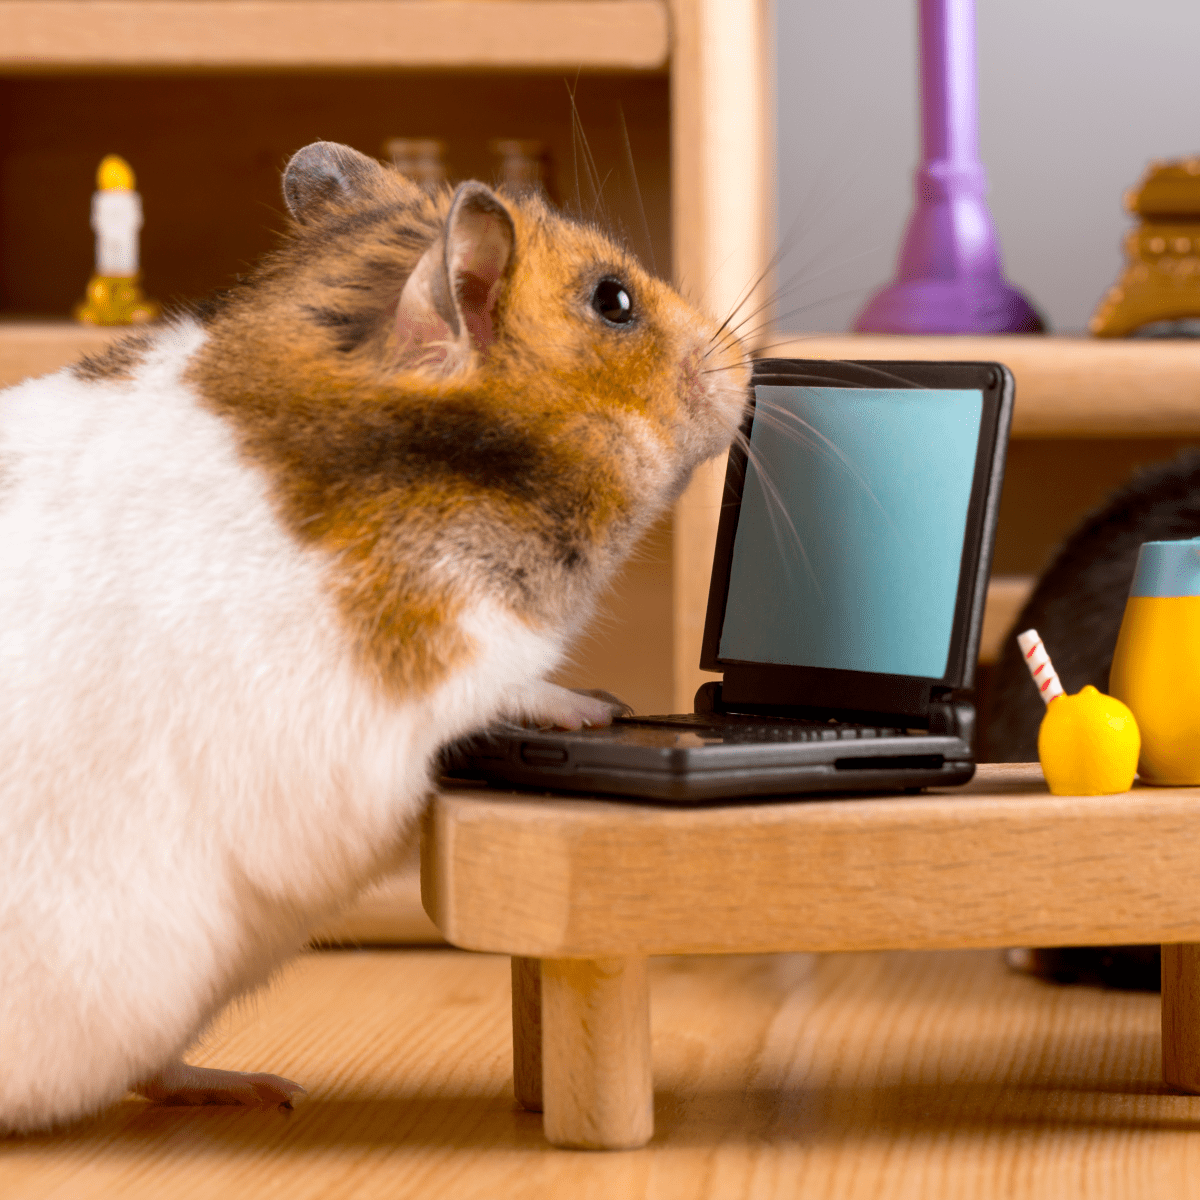 Daily Fluff: Hamster uses Vine app to make creative videos